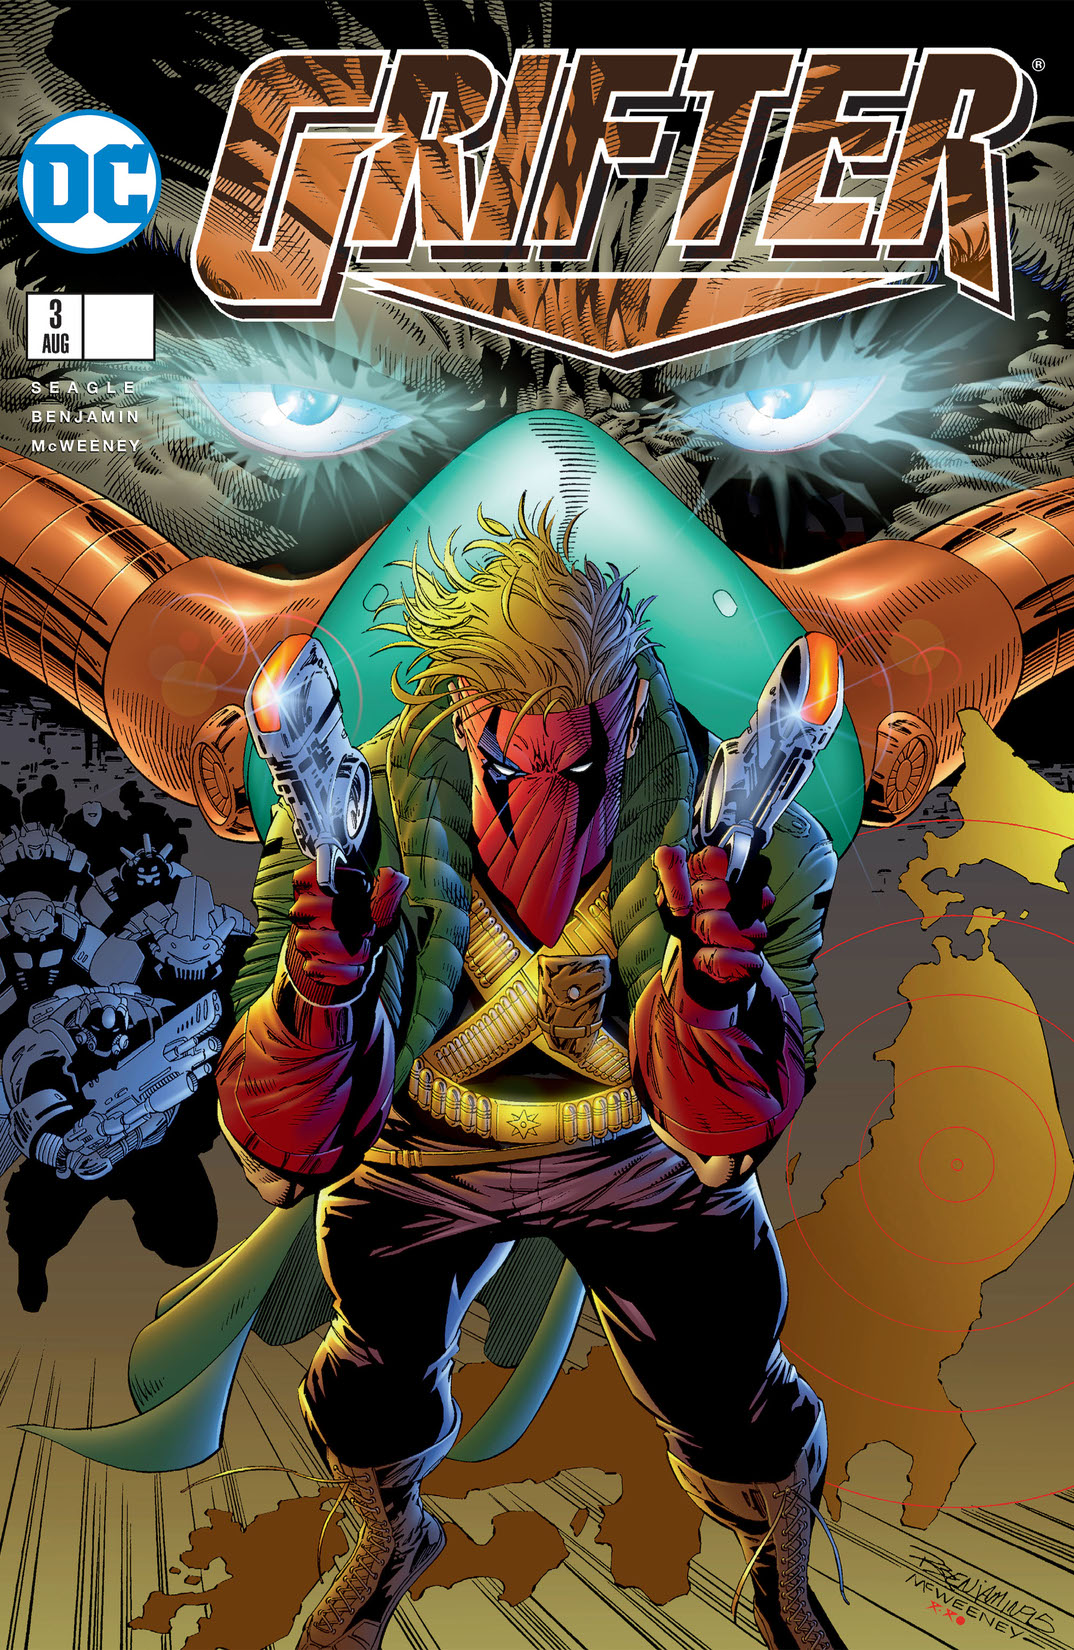 Grifter (1995-1996) #3 preview images